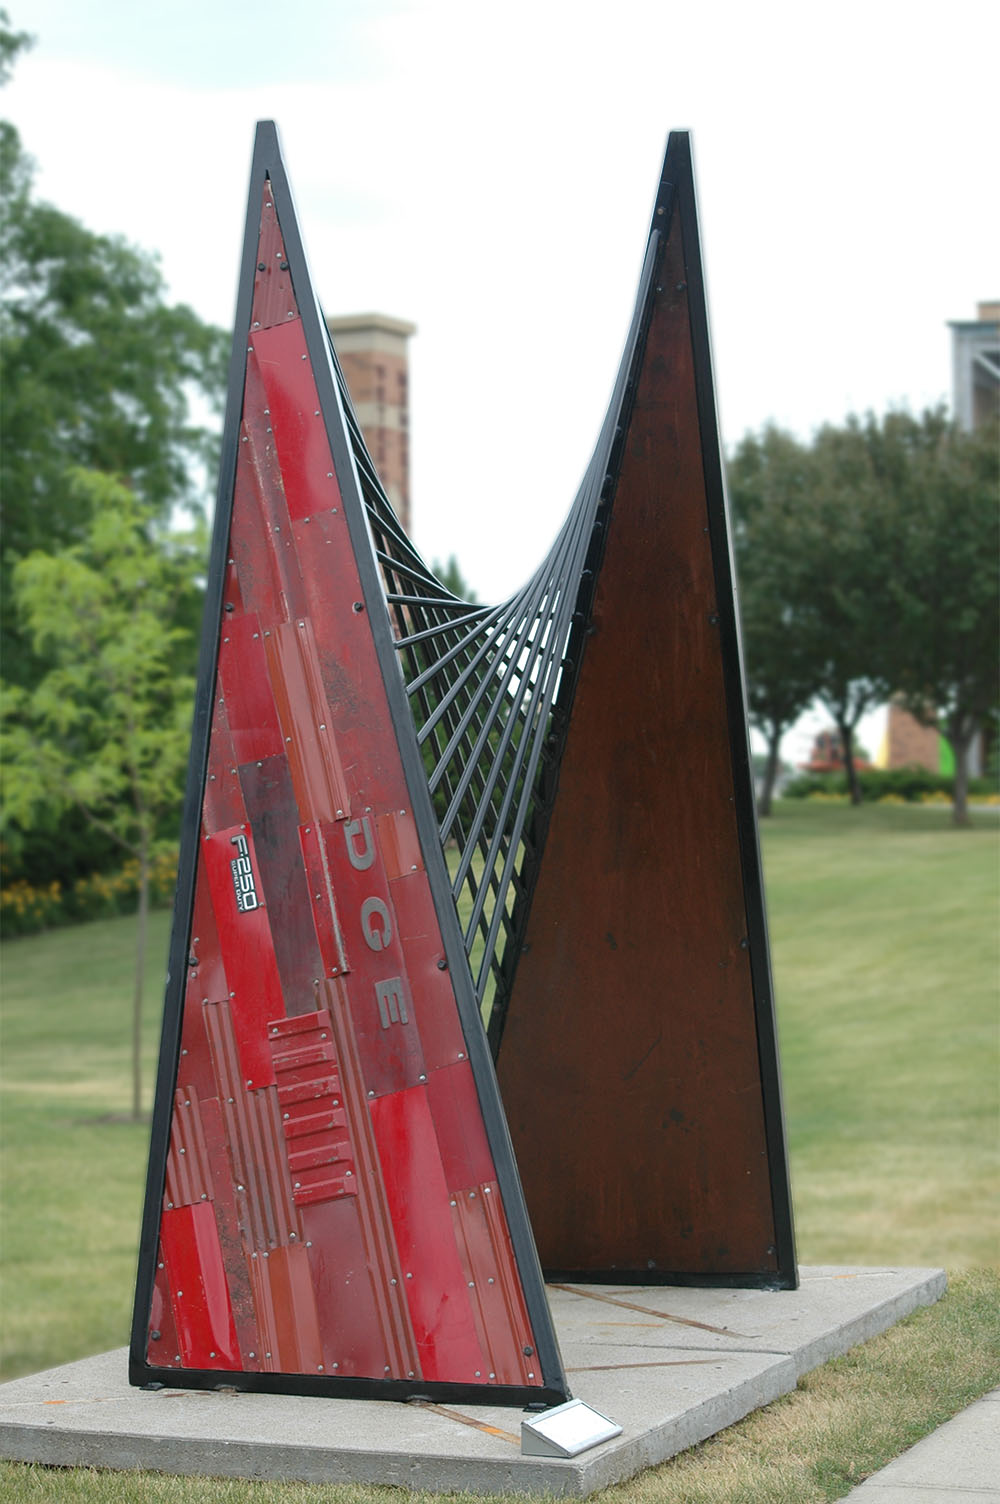 The Red Stick Sculpture